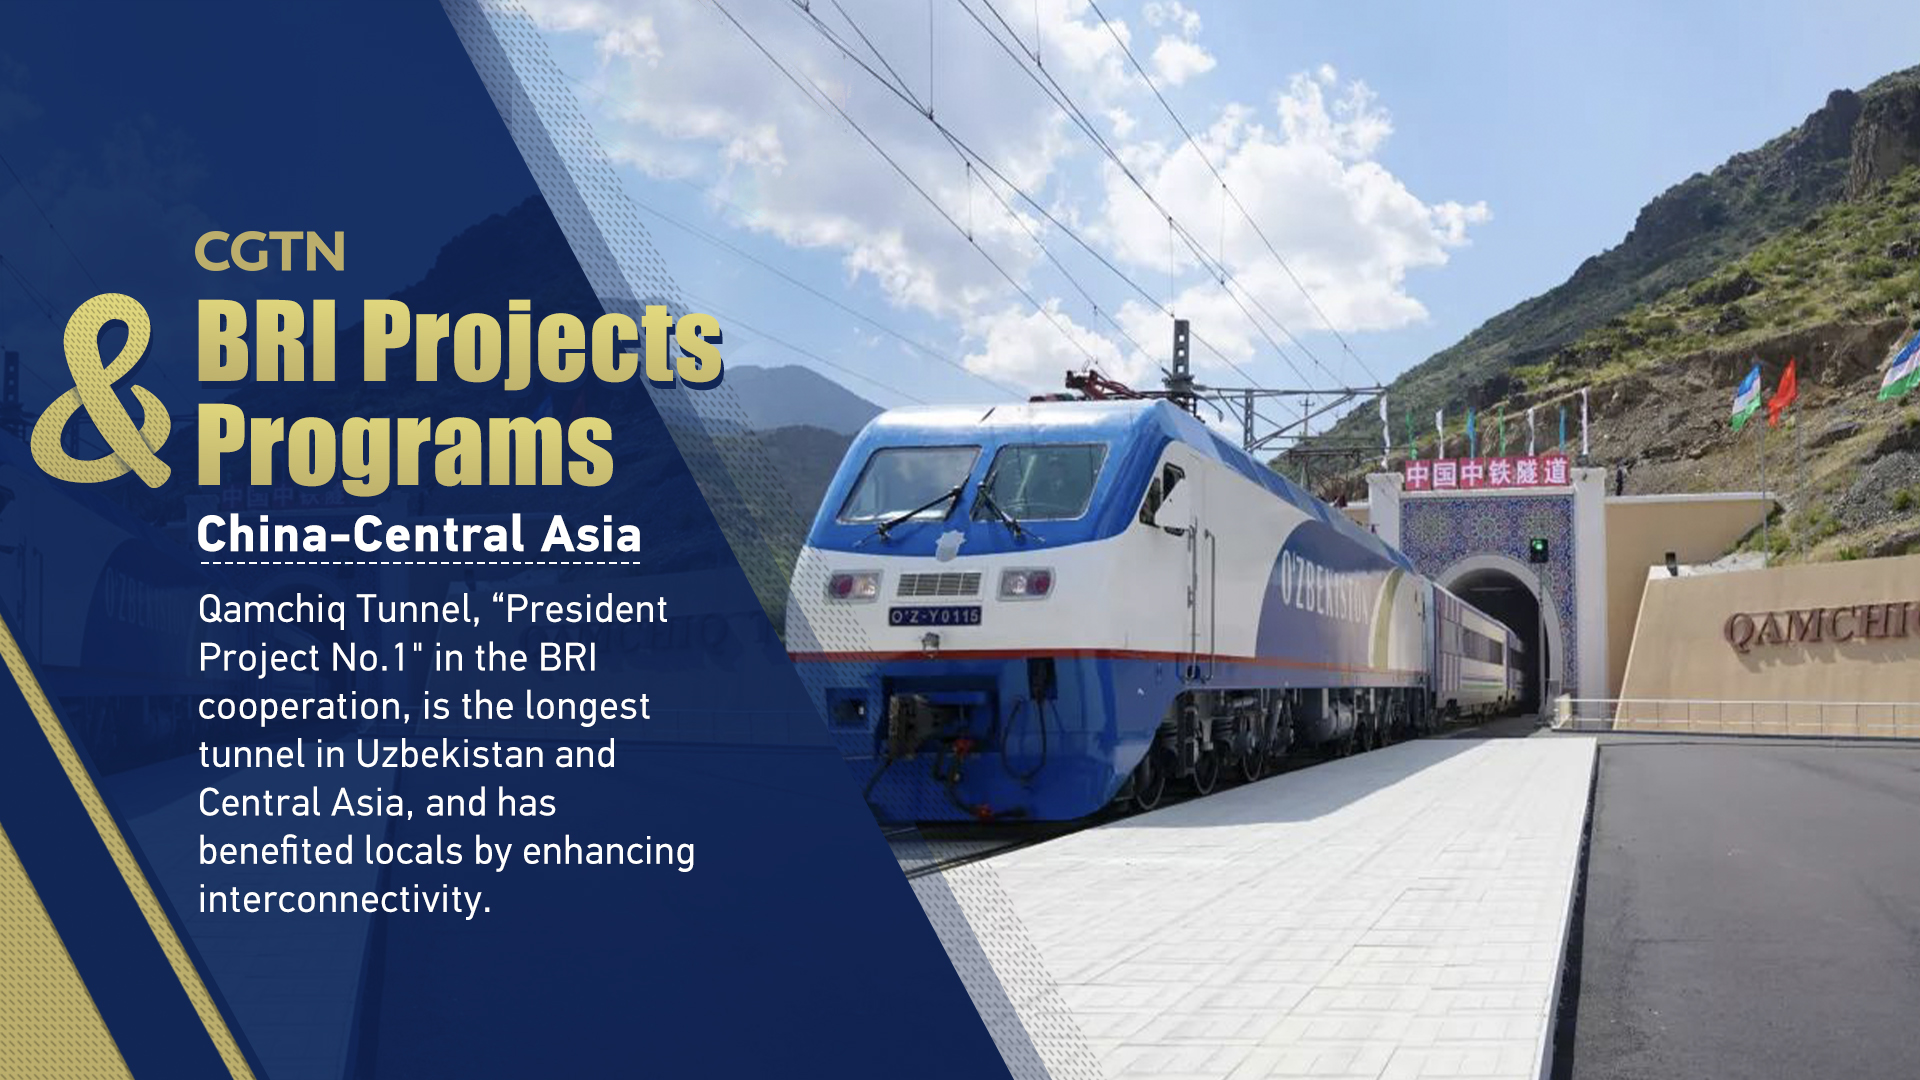 China-Central Asia: 'President Project No.1' in BRI cooperation